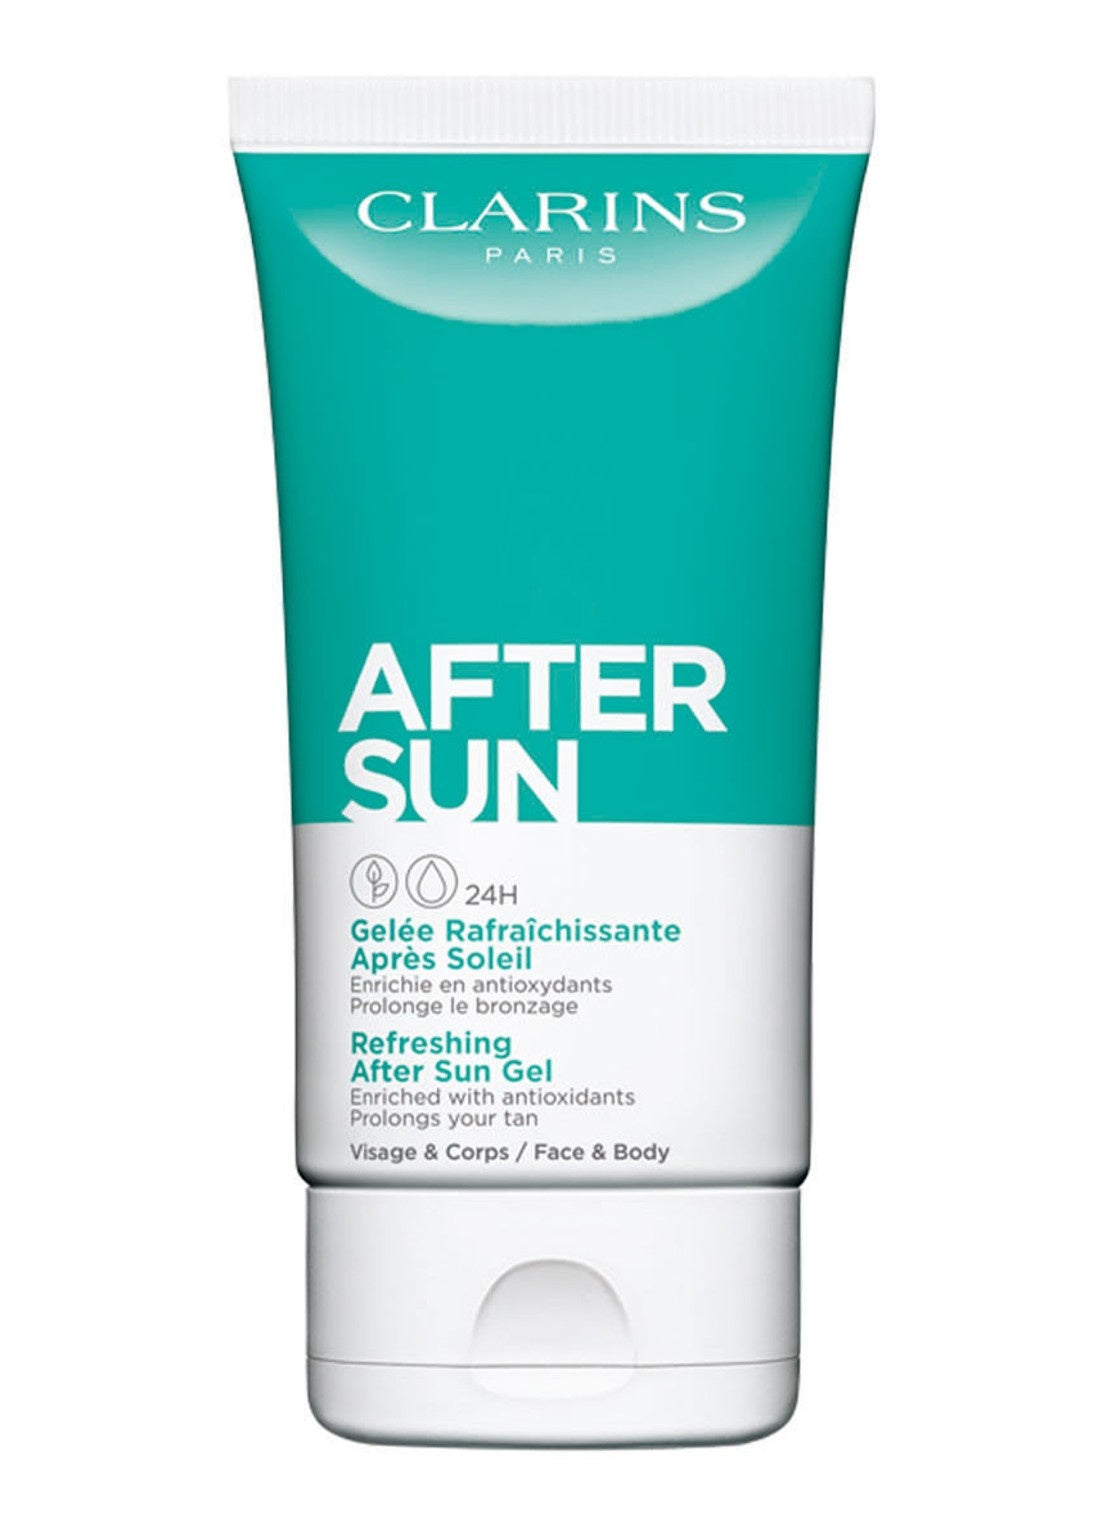 Refreshing After Sun Gel Face & Body